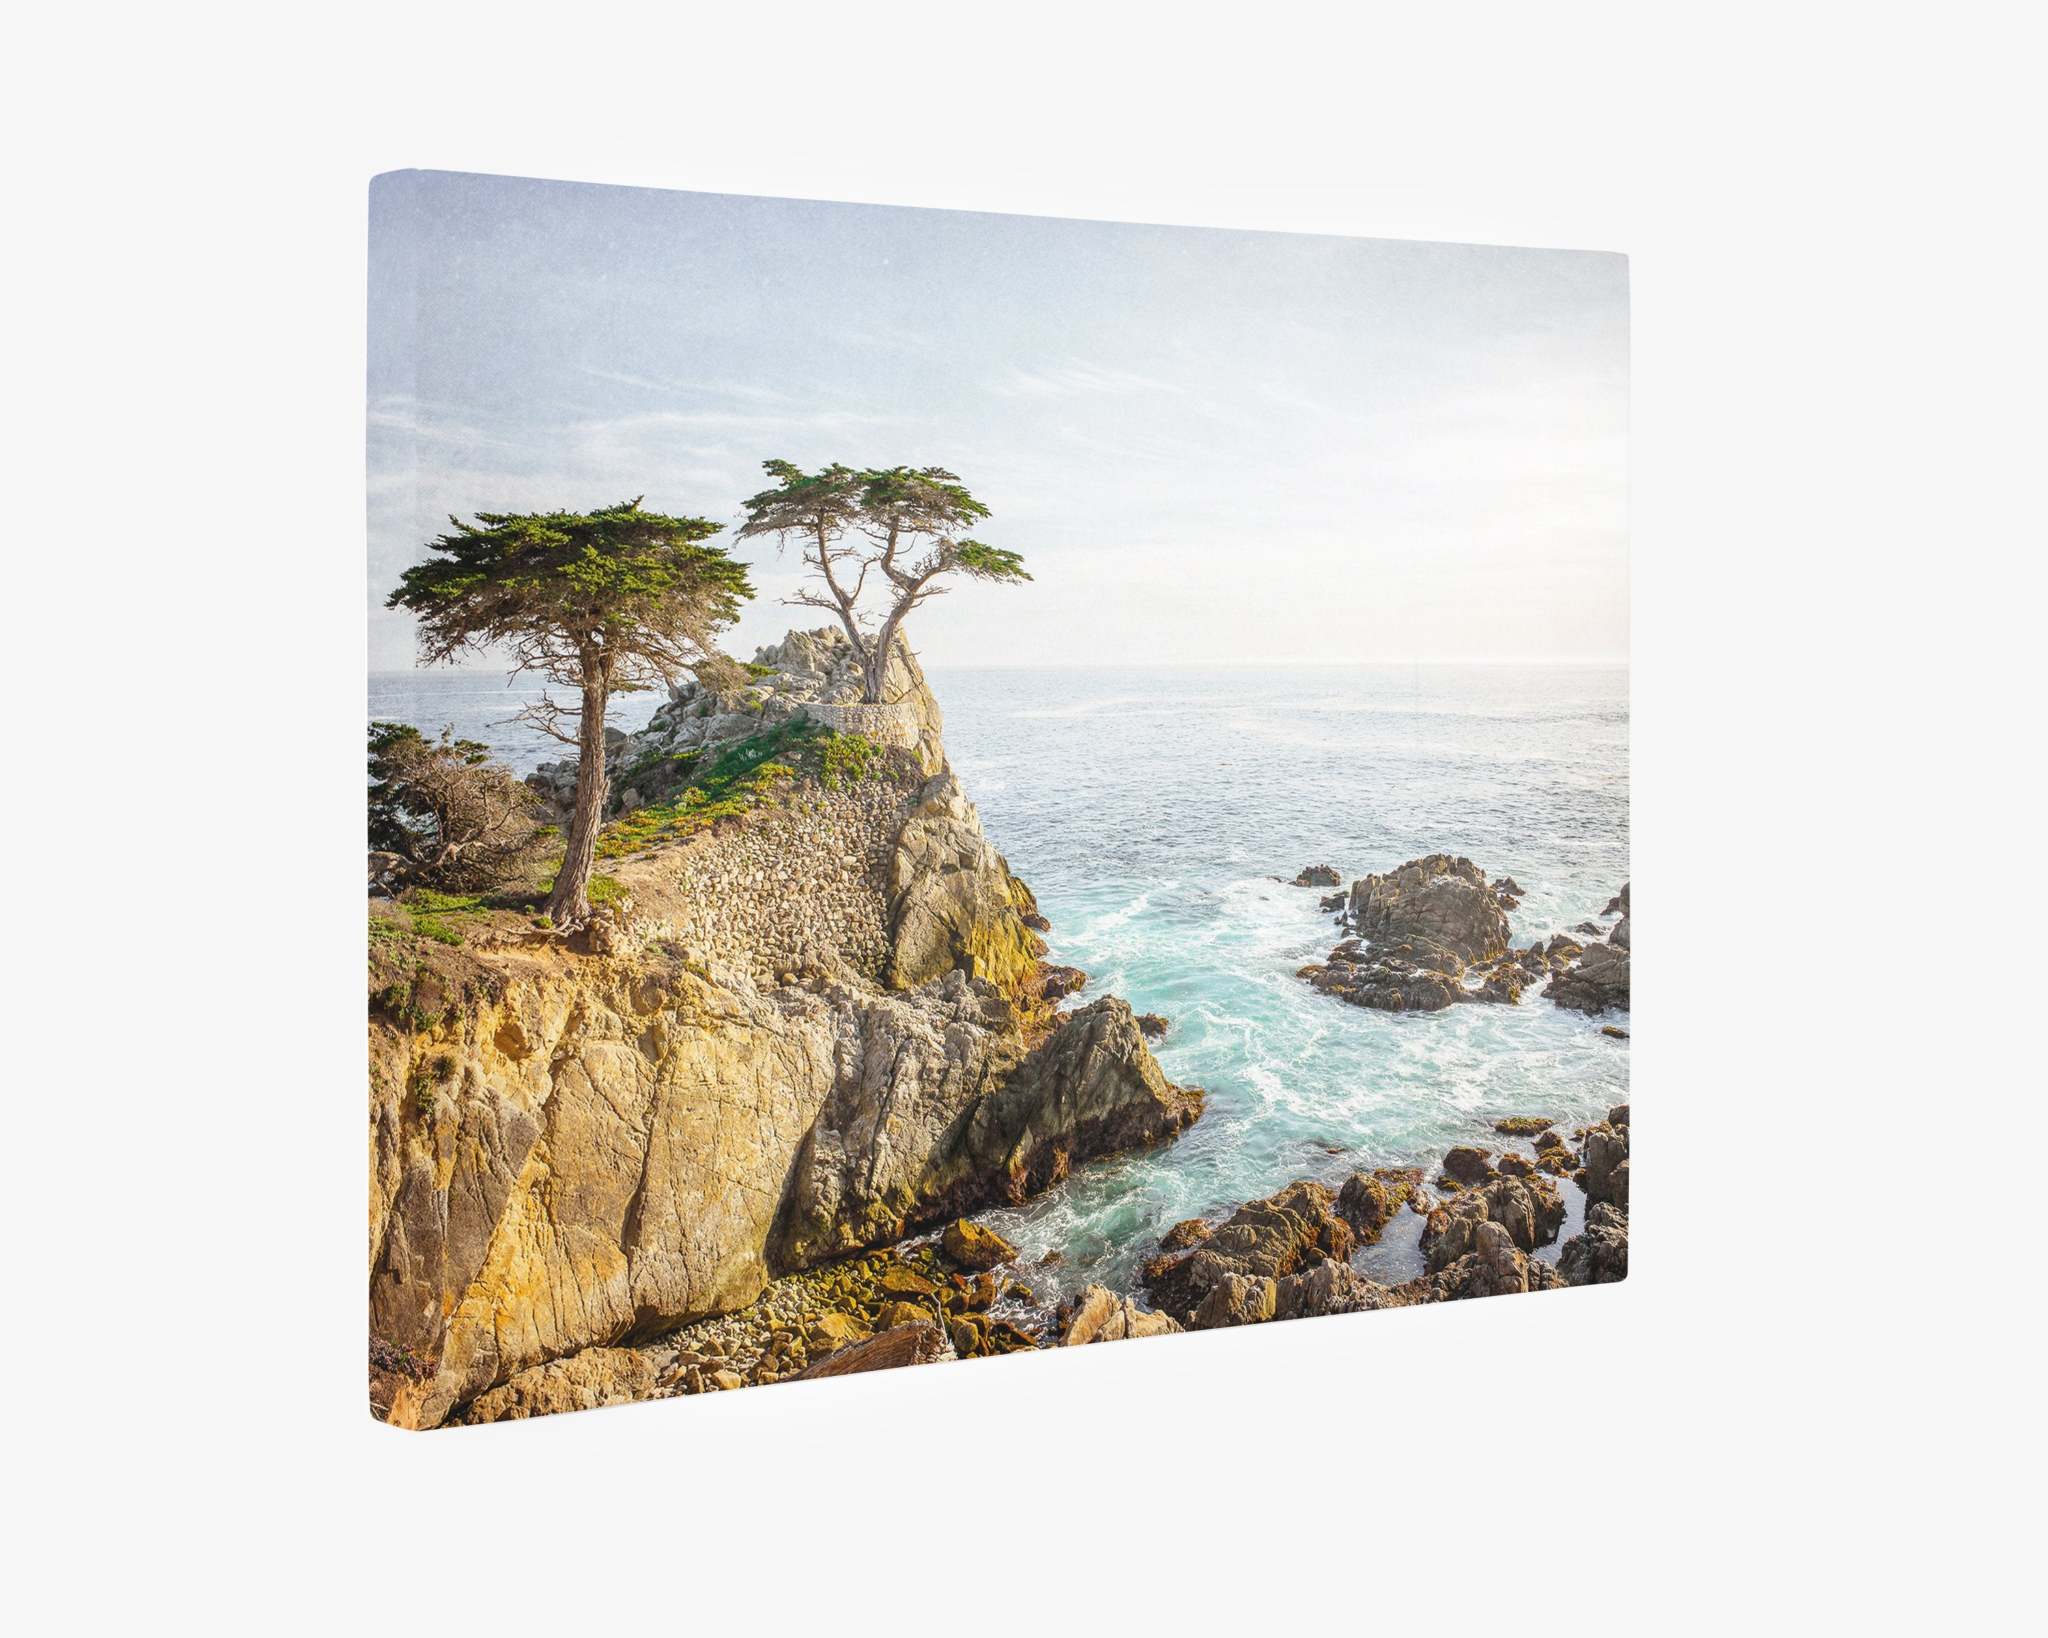 A canvas gallery wrap of a coastal scene featuring a rocky cliff with two lone trees atop it, surrounded by the ocean. The waves crash against the rocks under a partly cloudy sky, creating a serene and picturesque view. This piece embodies the beauty found in Offley Green's California Coastal Canvas Wall Art, 'Lone Cypress,' on premium artist-grade canvas.